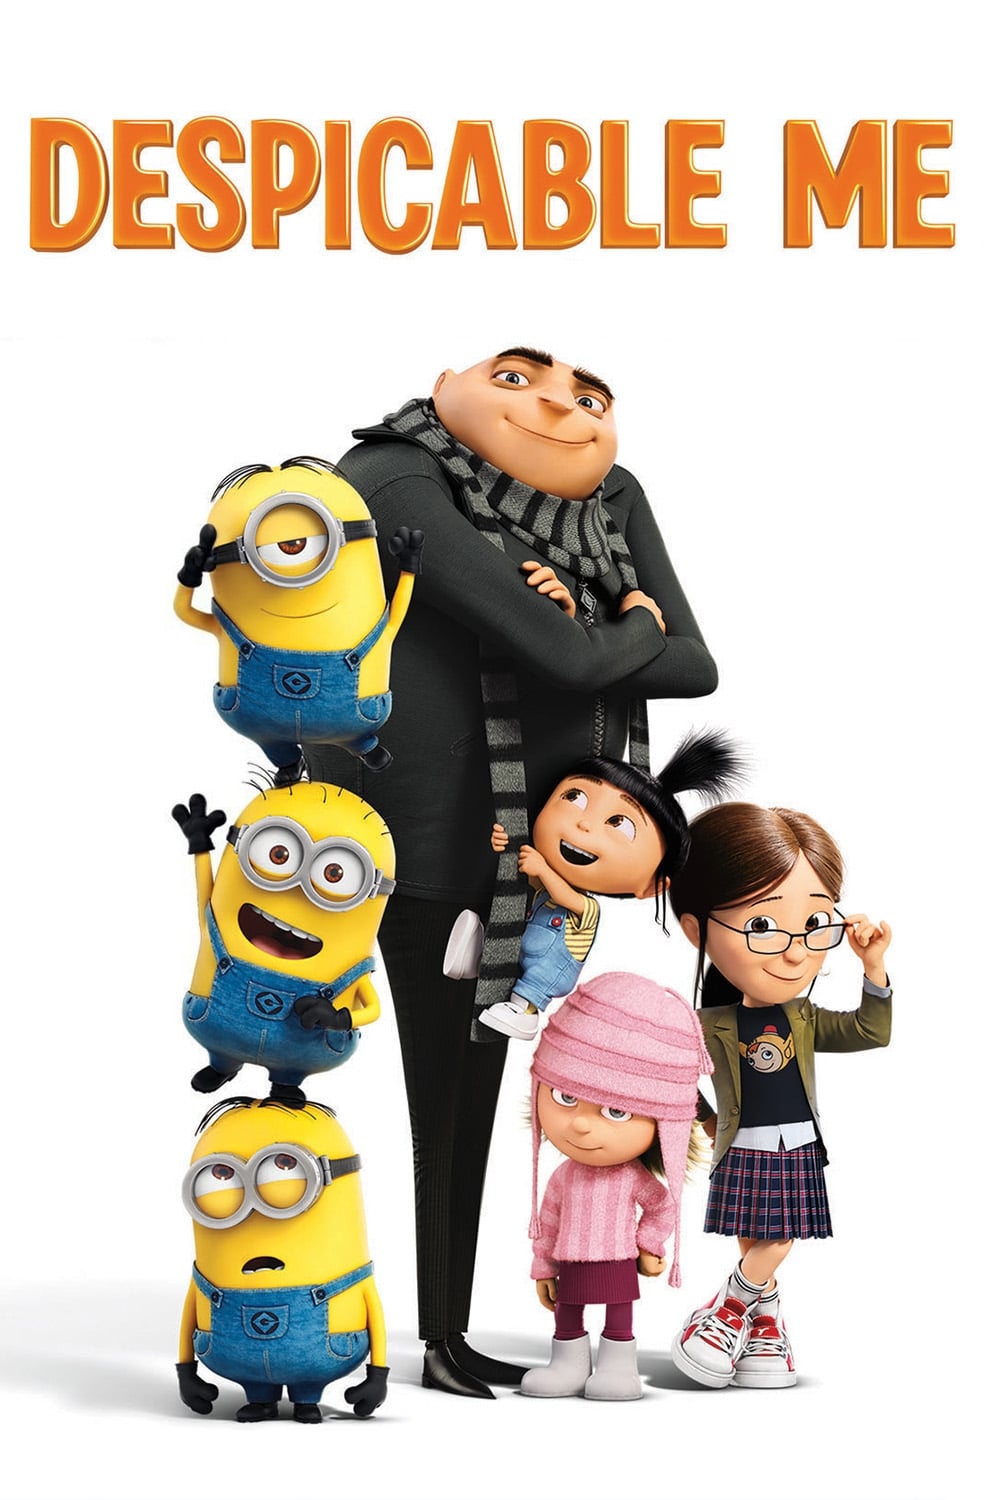 Despicable Me (2010) REMUX 4K HDR Latino – CMHDD